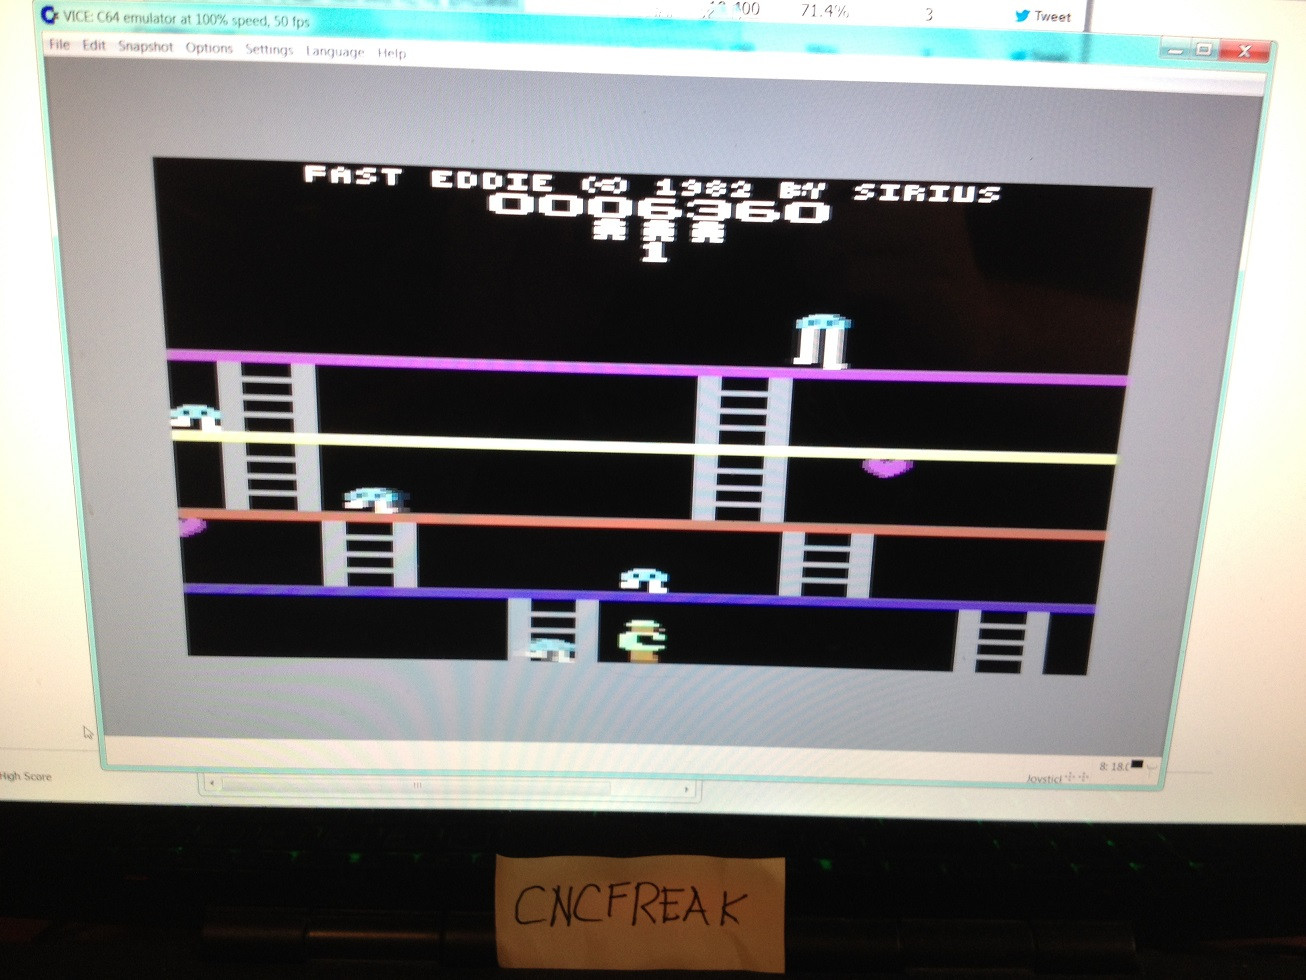 cncfreak: Fast Eddie (Commodore 64 Emulated) 6,360 points on 2013-10-03 17:04:08